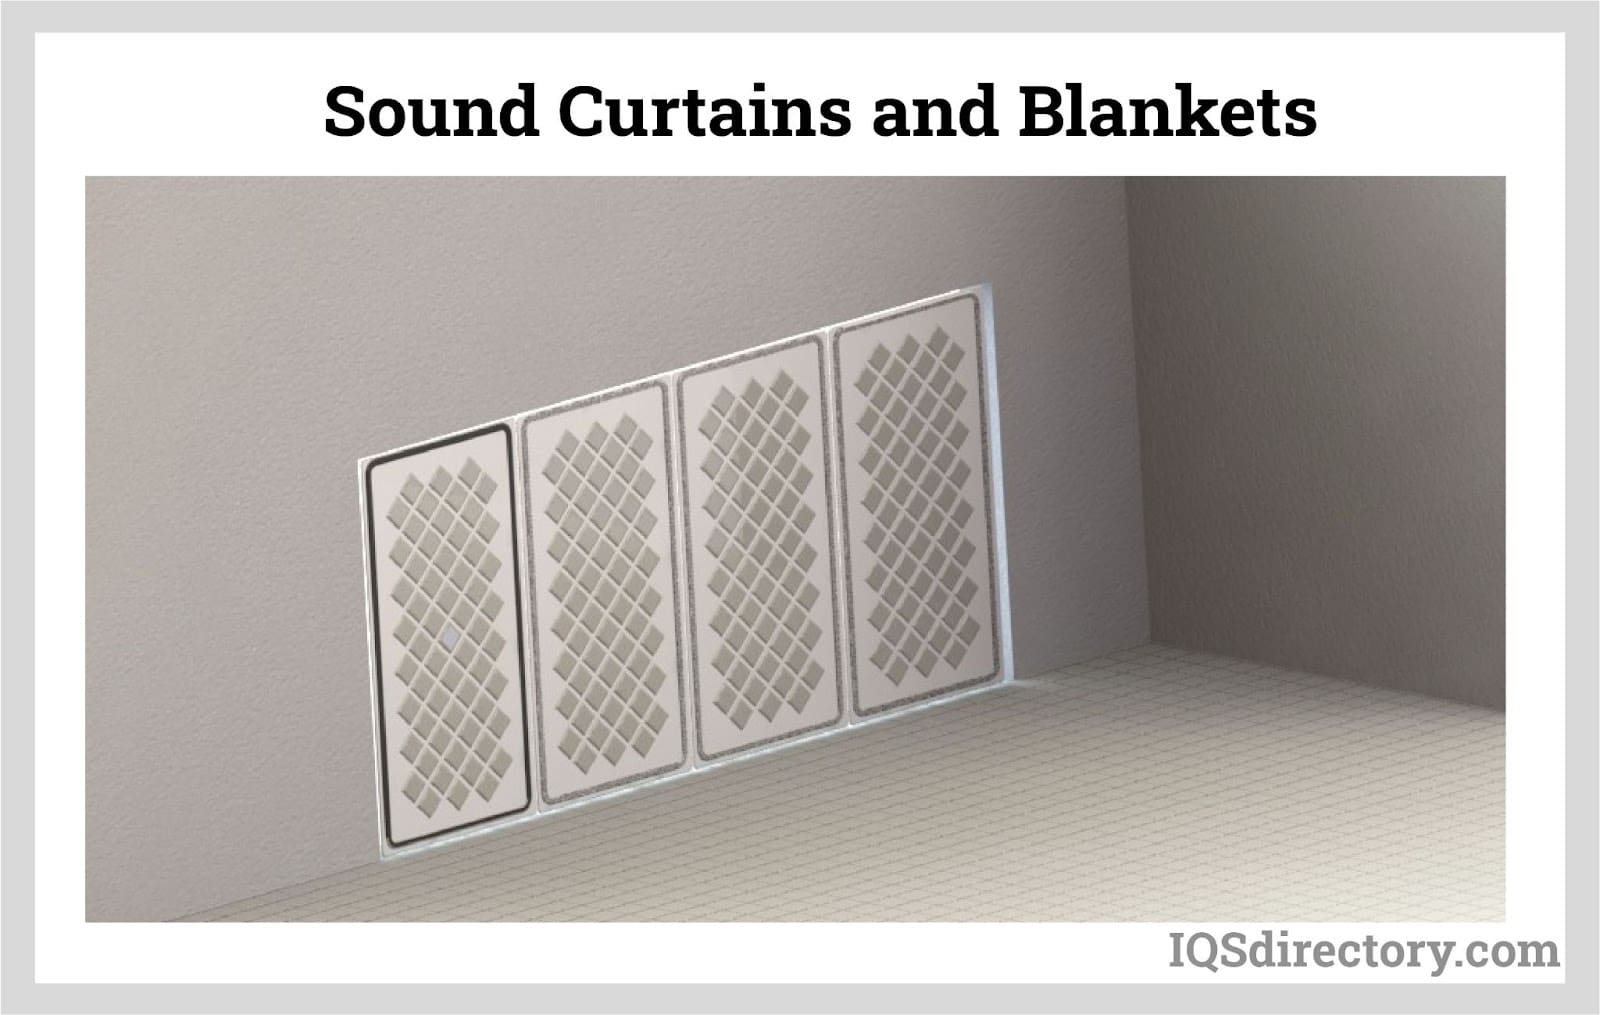 Sound Curtains and Blankets